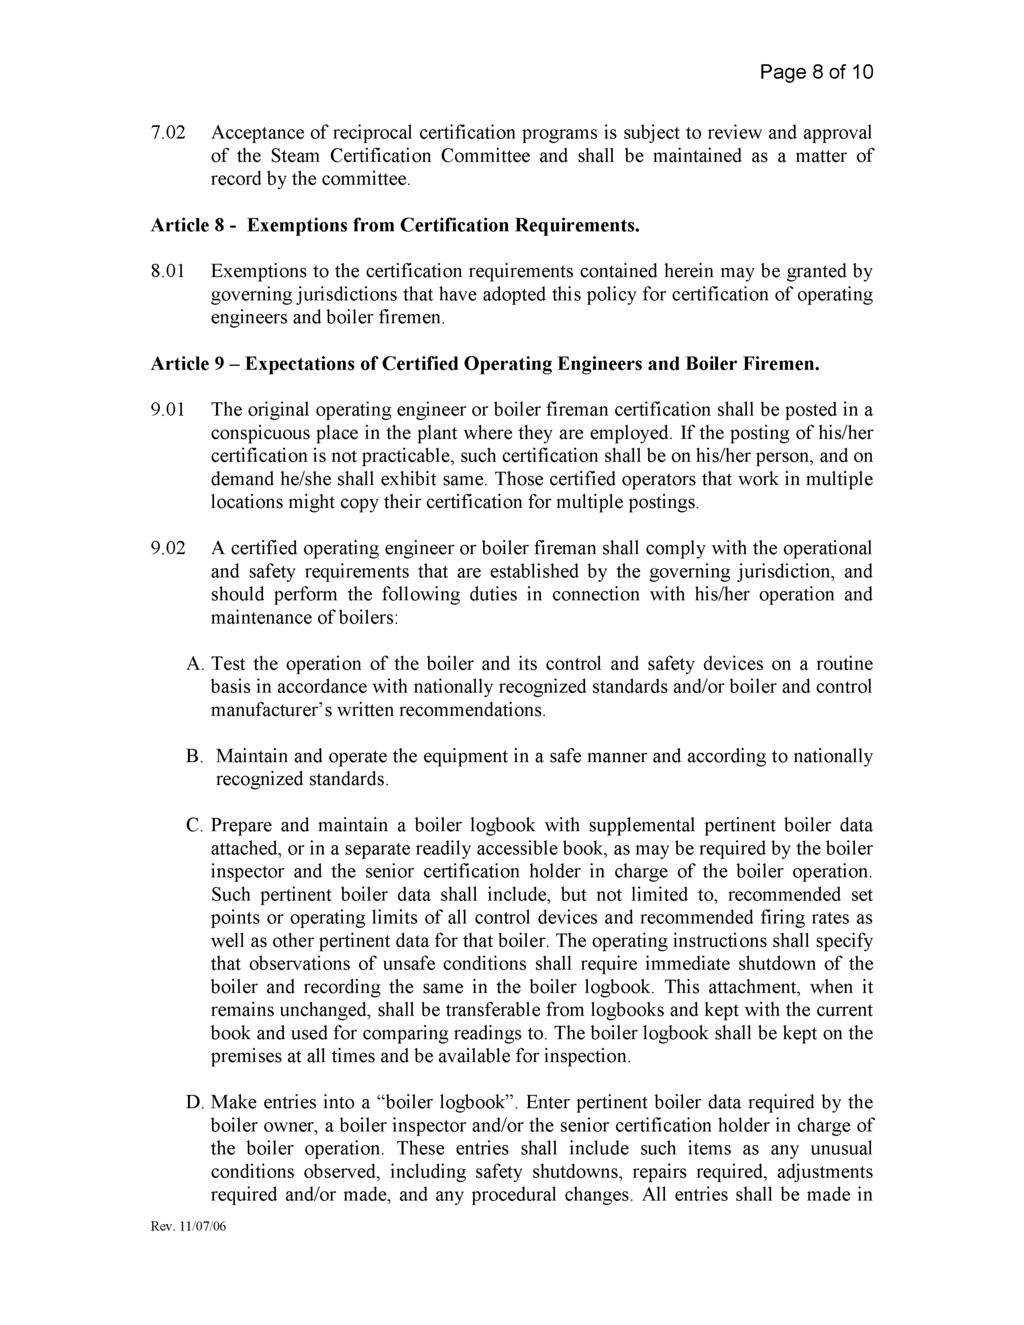 Page 8 of 10 7.02 Acceptance of reciprocal certification programs is subject to review and approval of the Steam Certification Committee and shall be maintained as a matter of record by the committee.